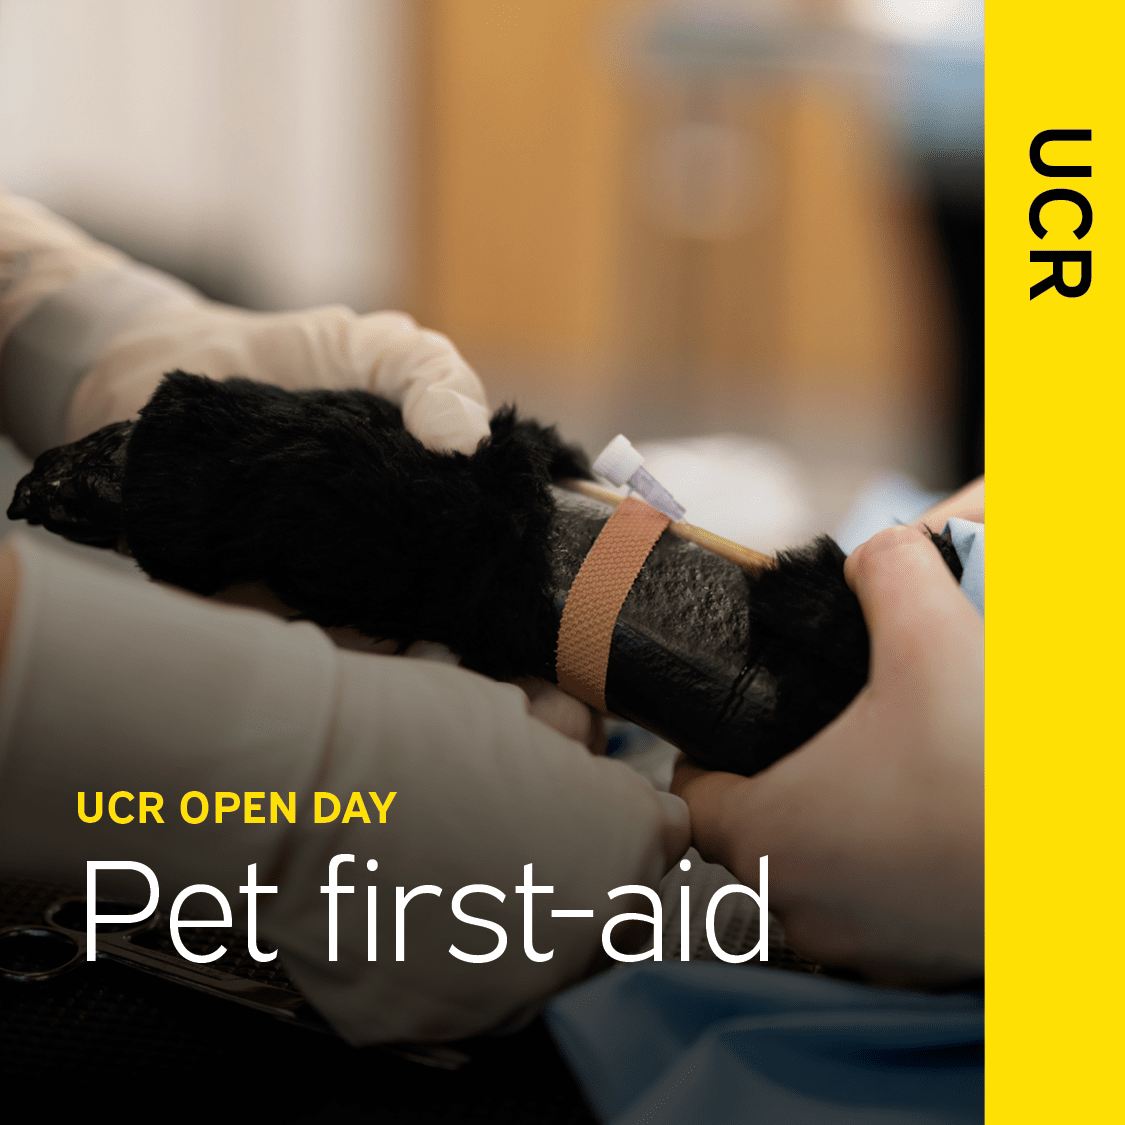 Pet first-aid